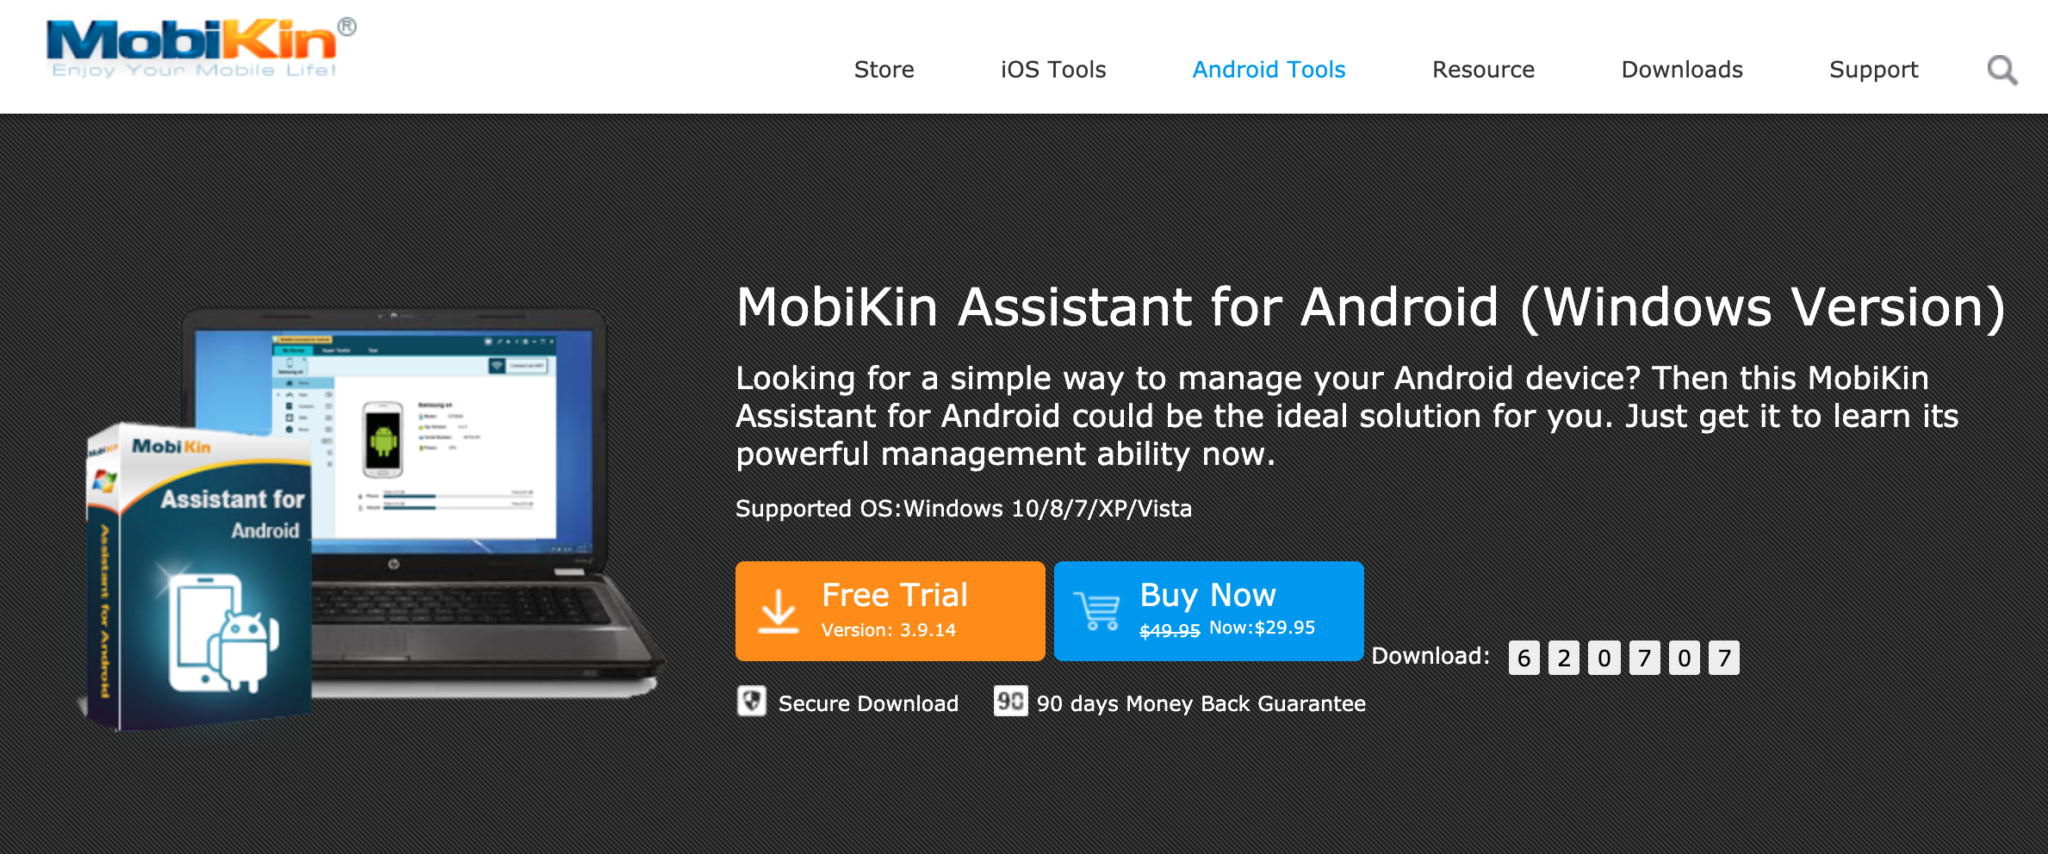 mobikin assistant for android 3.5.19 registration code